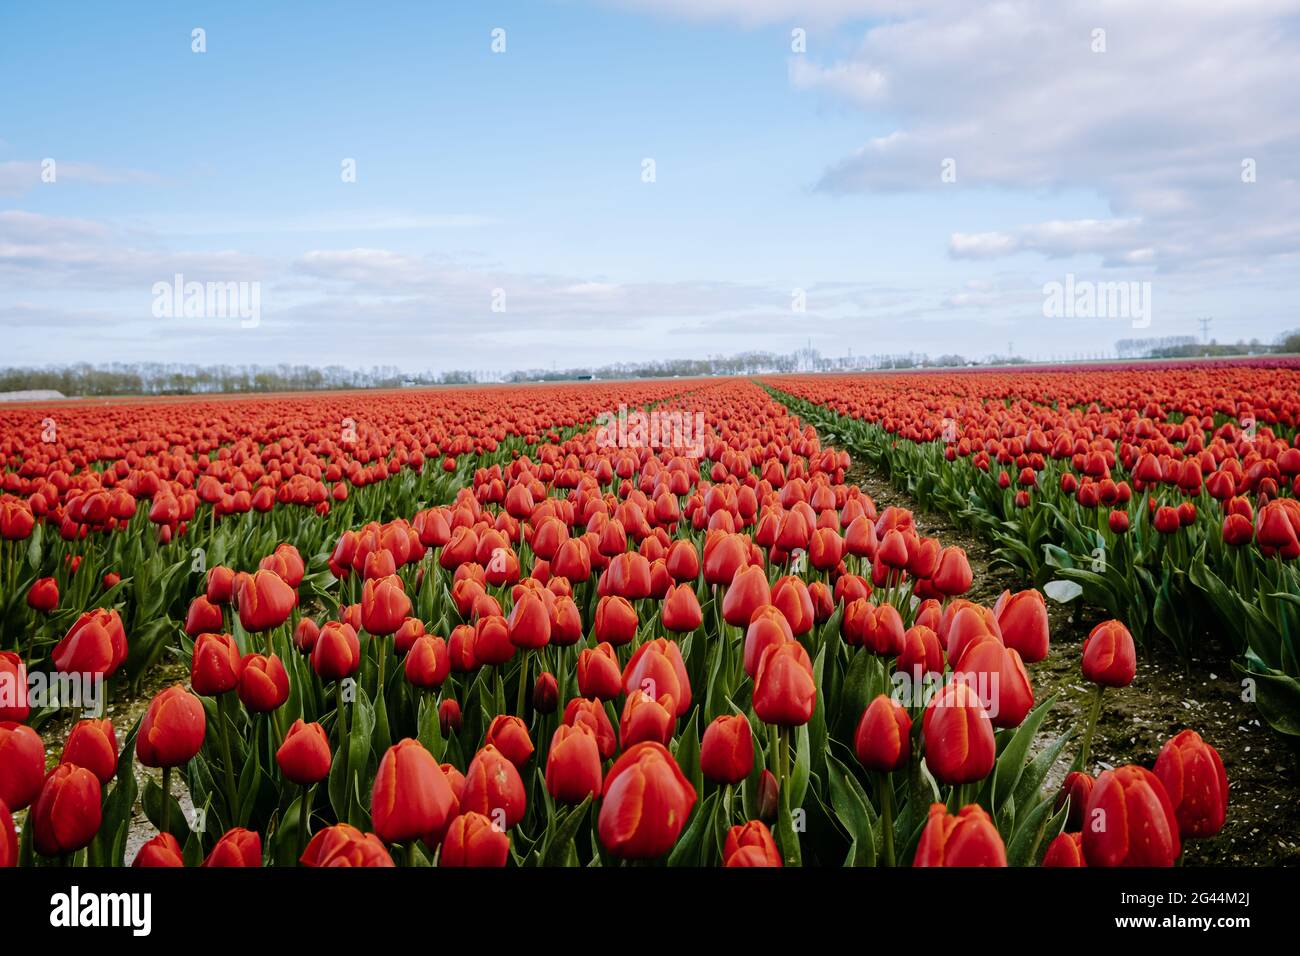 Aerial view of bulb-fields in springtime, colorful tulip fields in the Netherlands Flevoland during Spring Stock Photo